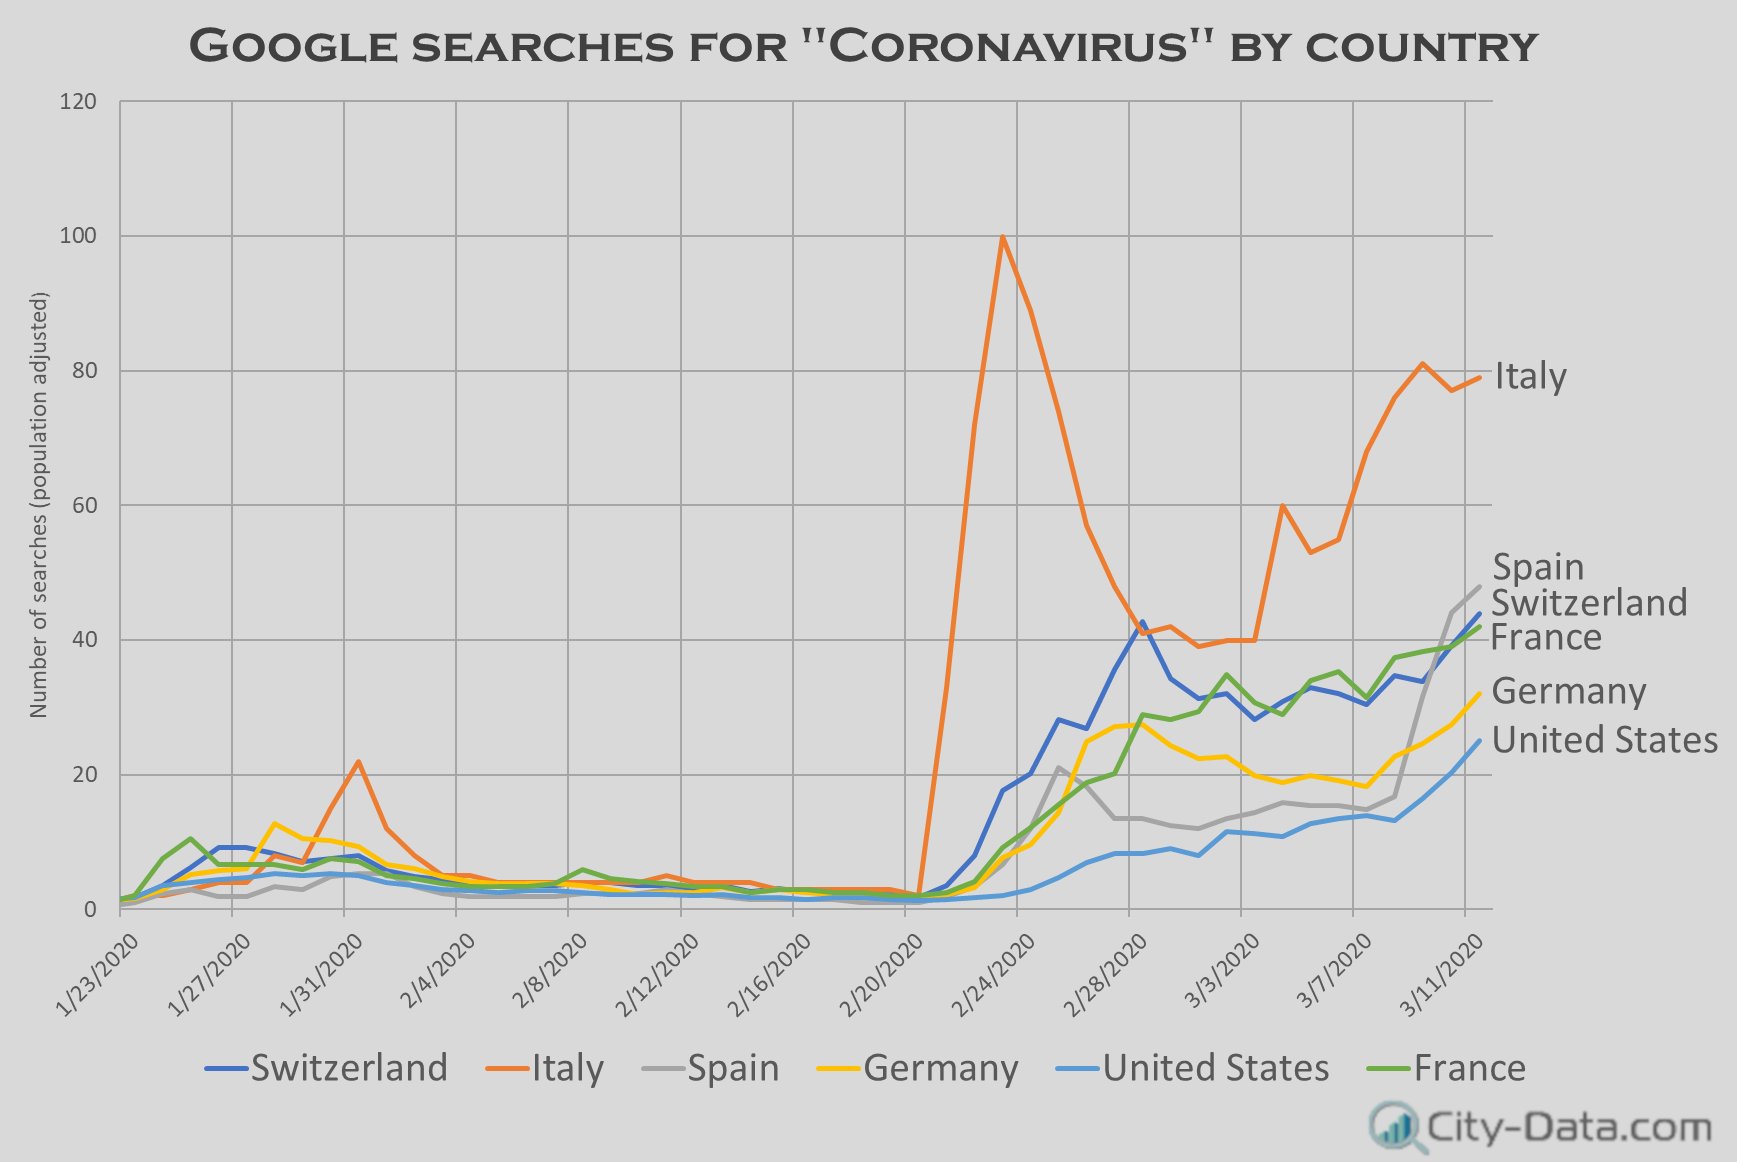 Google searches for "Coronavirus" by country